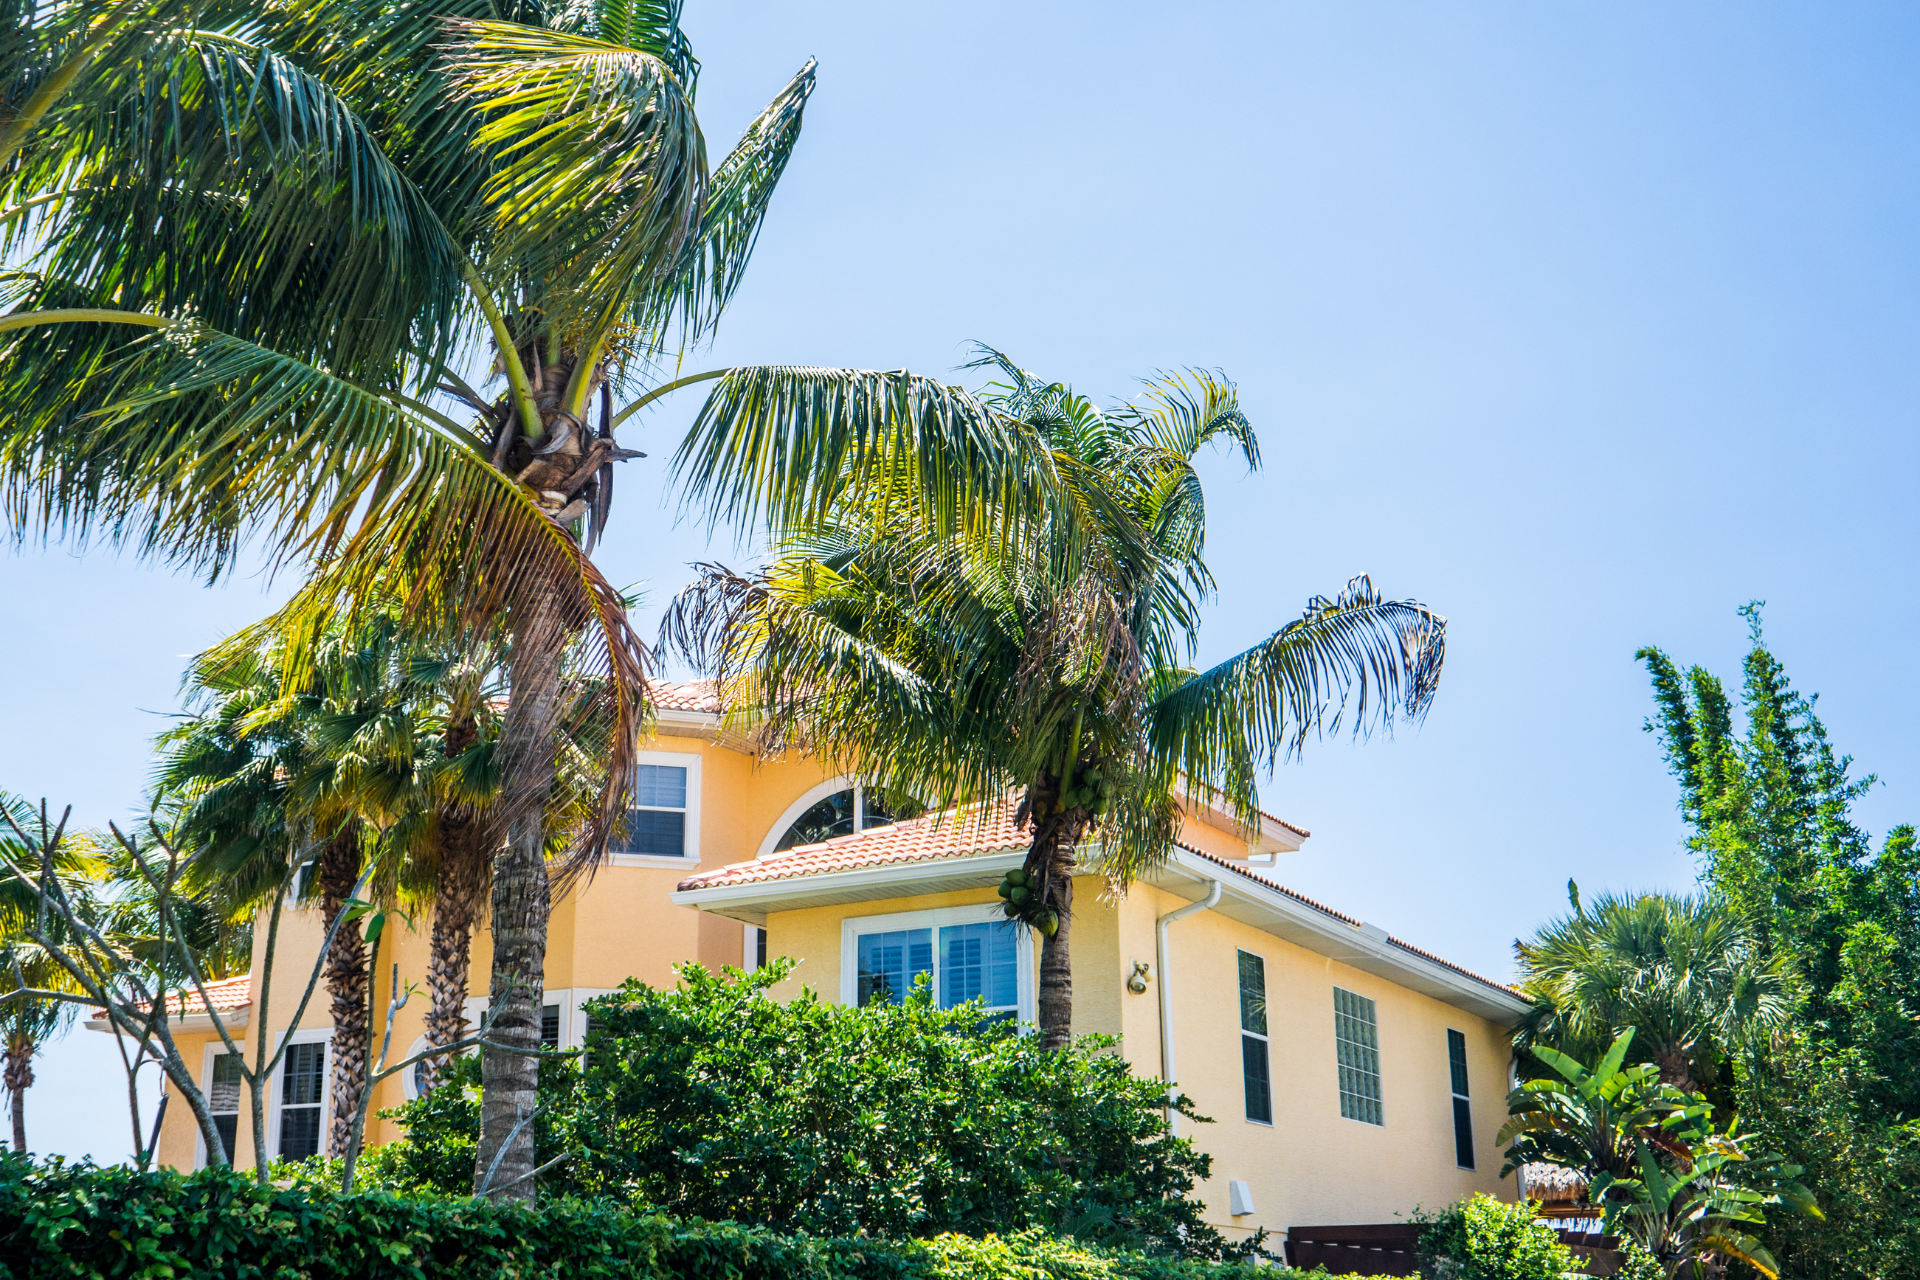 Home with palm trees in front